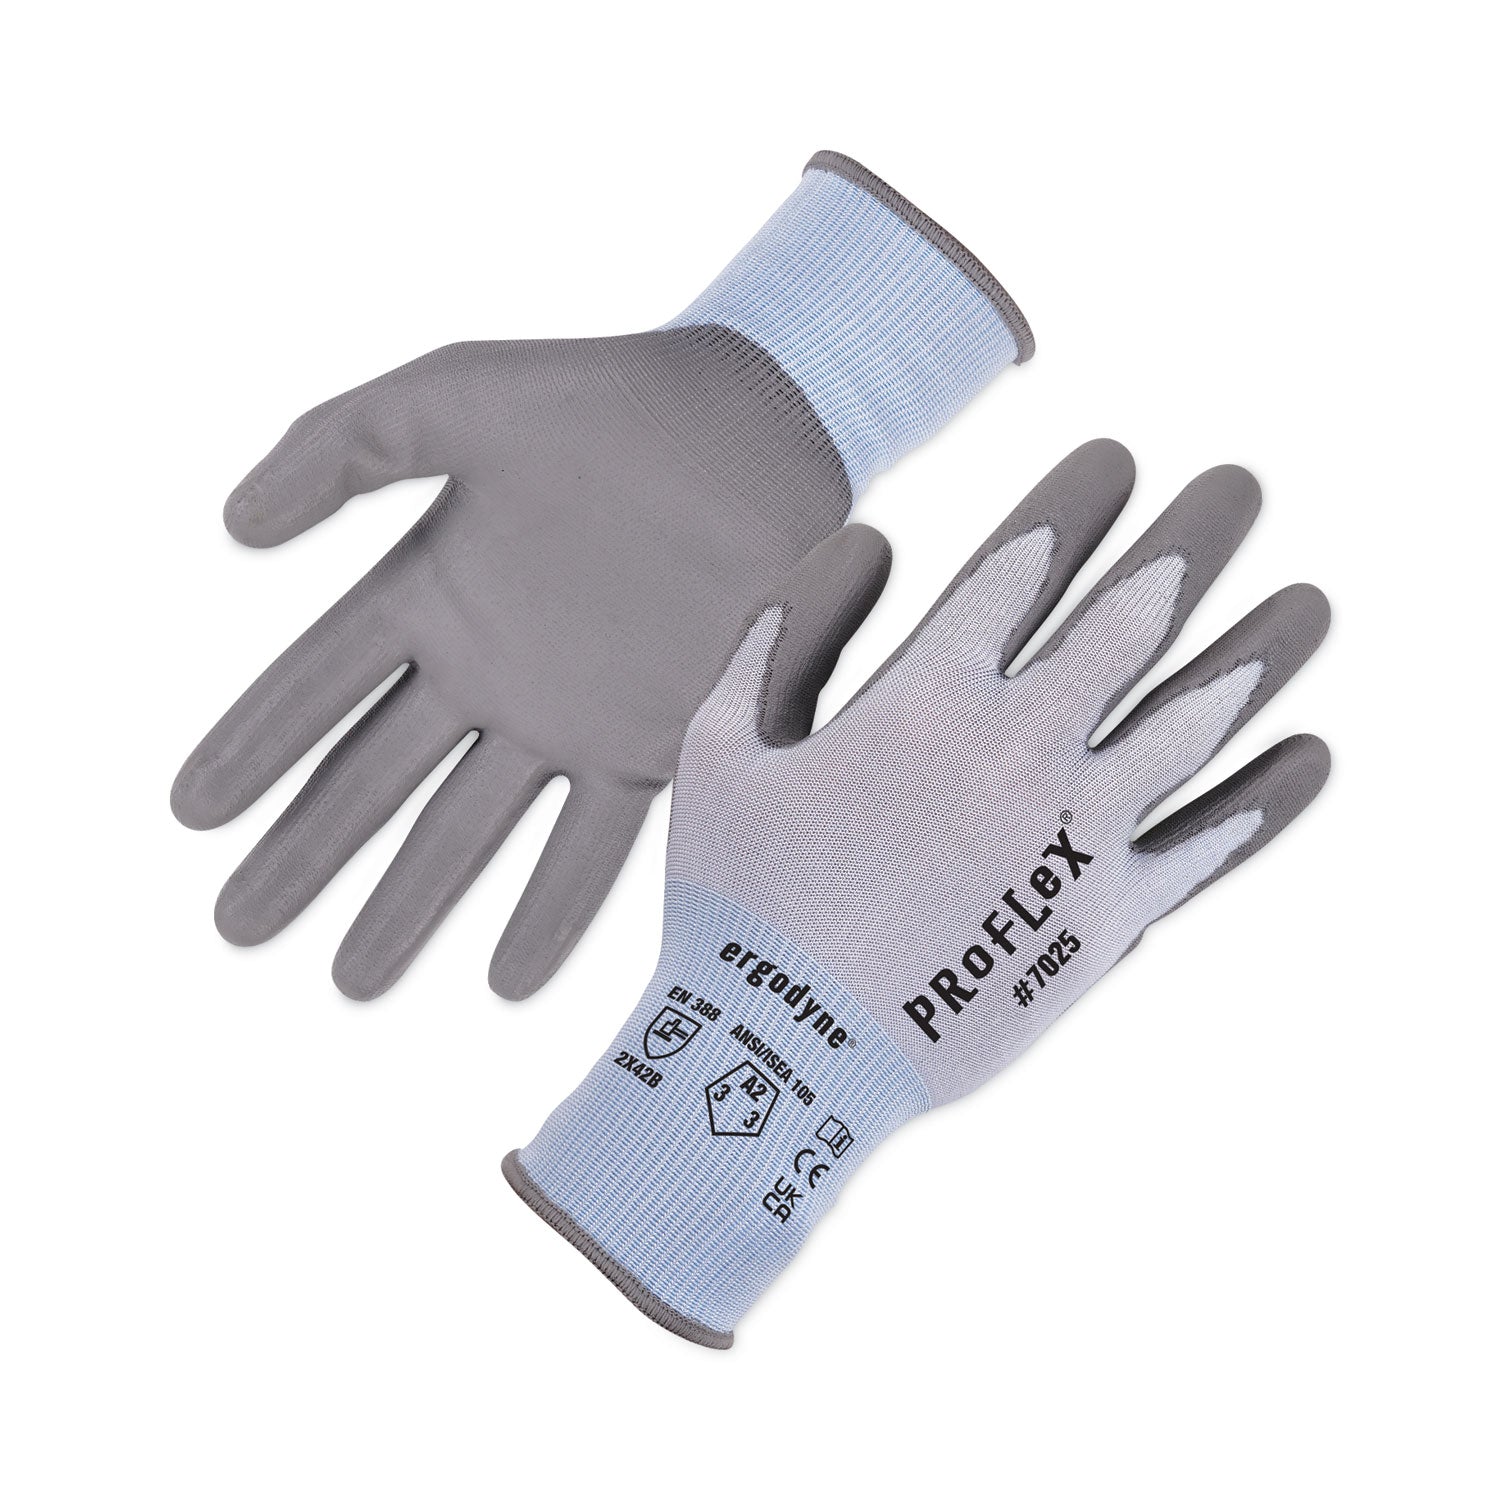 proflex-7025-ansi-a2-pu-coated-cr-gloves-blue-large-12-pairs-pack-ships-in-1-3-business-days_ego10424 - 1